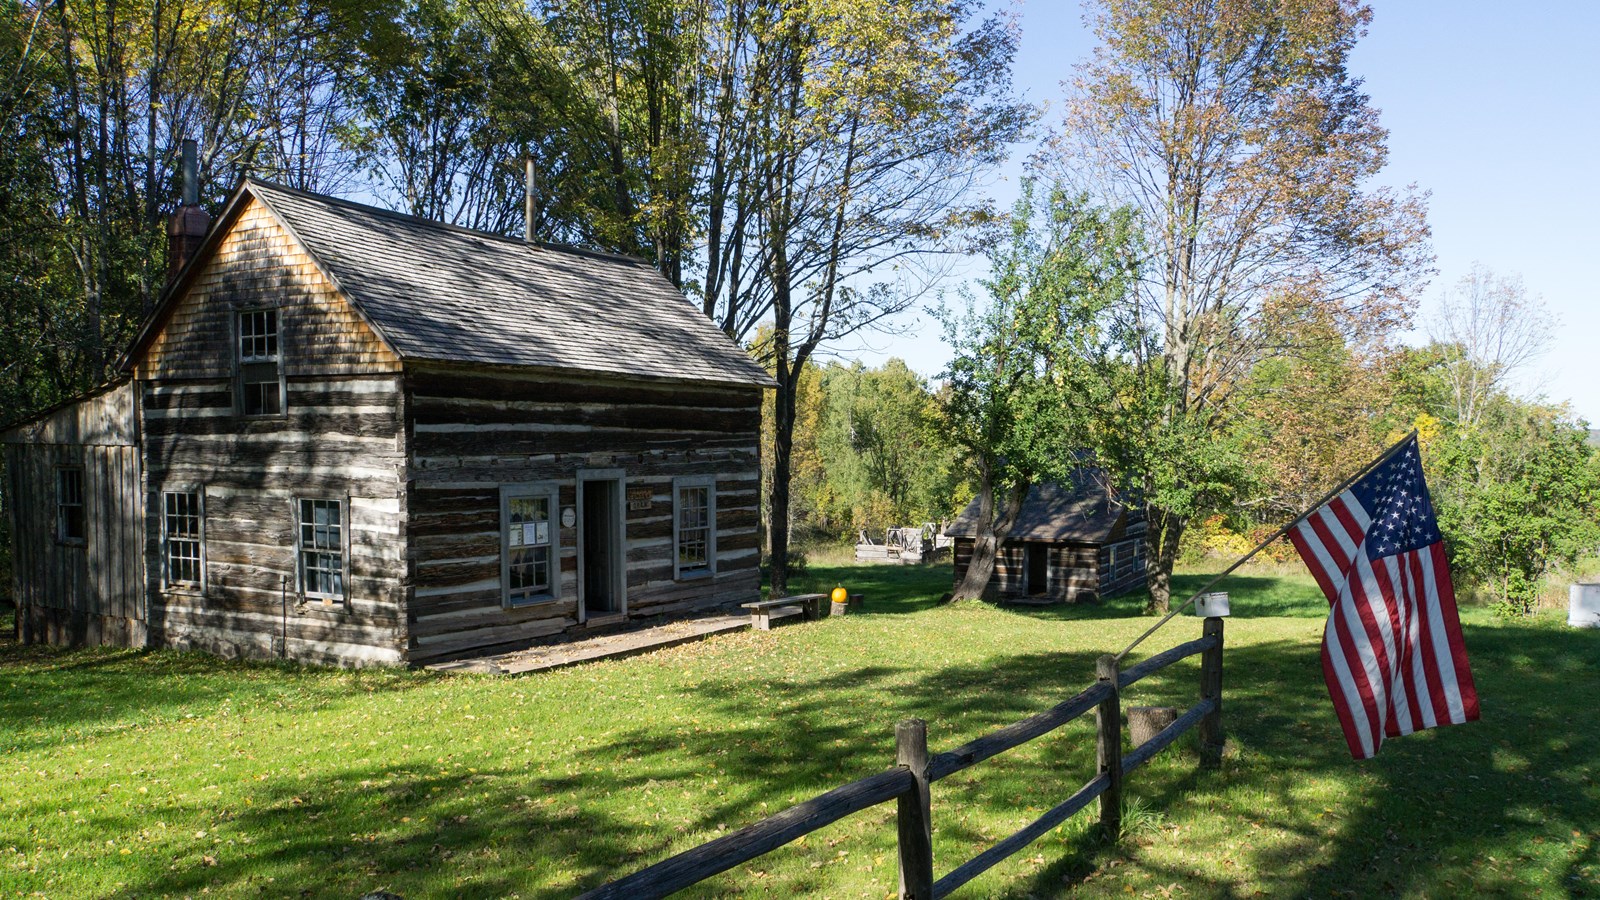 Summer scene of log cabins with a wooden fence in the foreground and trees in the background.